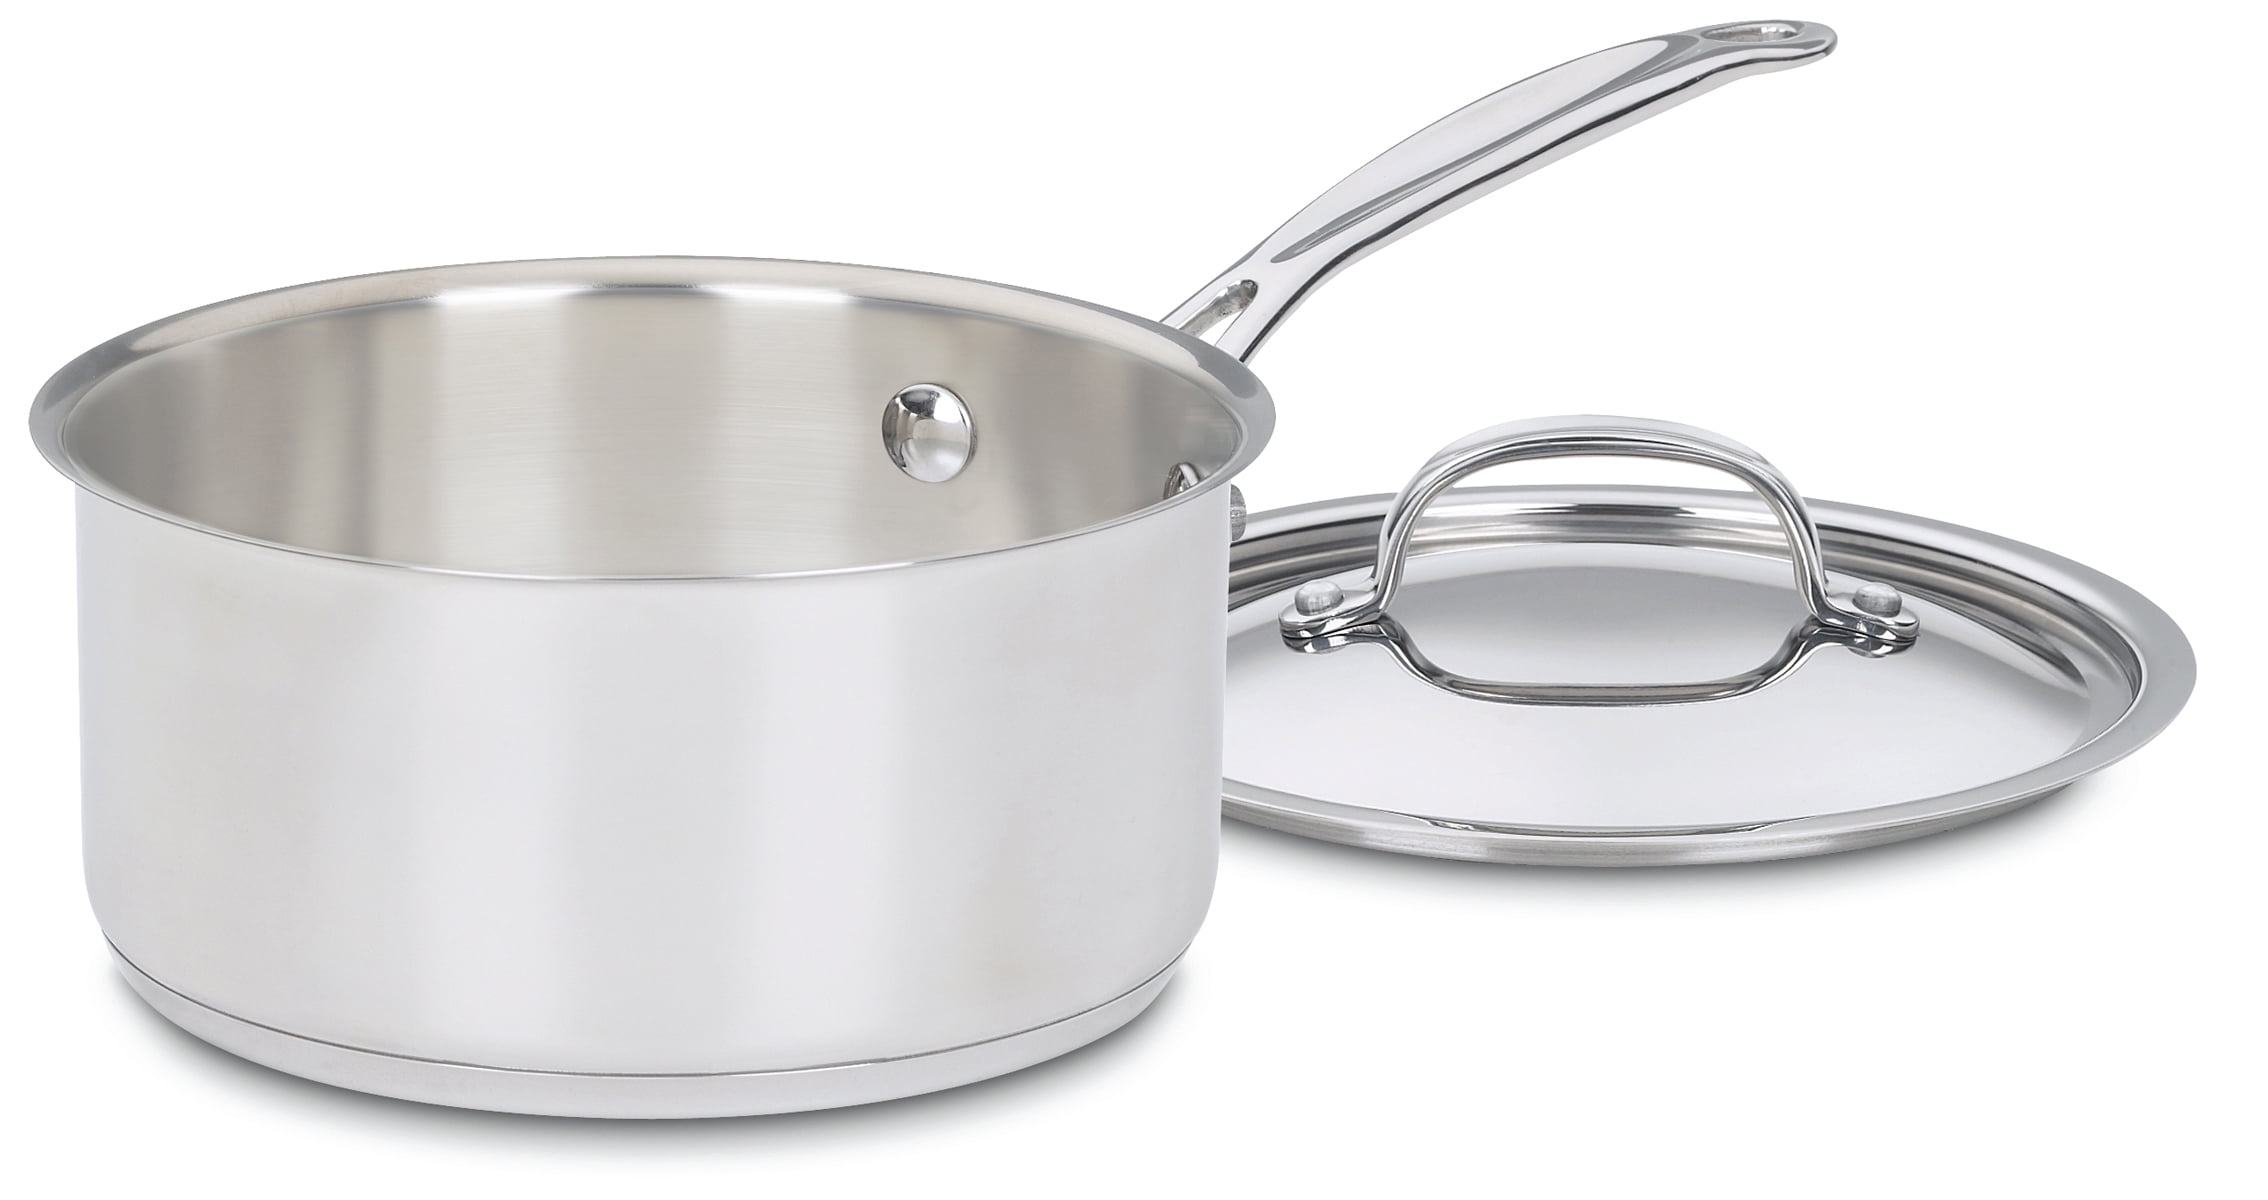 Walchoice 2 Quart Saucepan with Lid, 18/10 Stainless Steel Soup Pot for  Home Kitchen, Transparent Lid & Dishwasher Safe